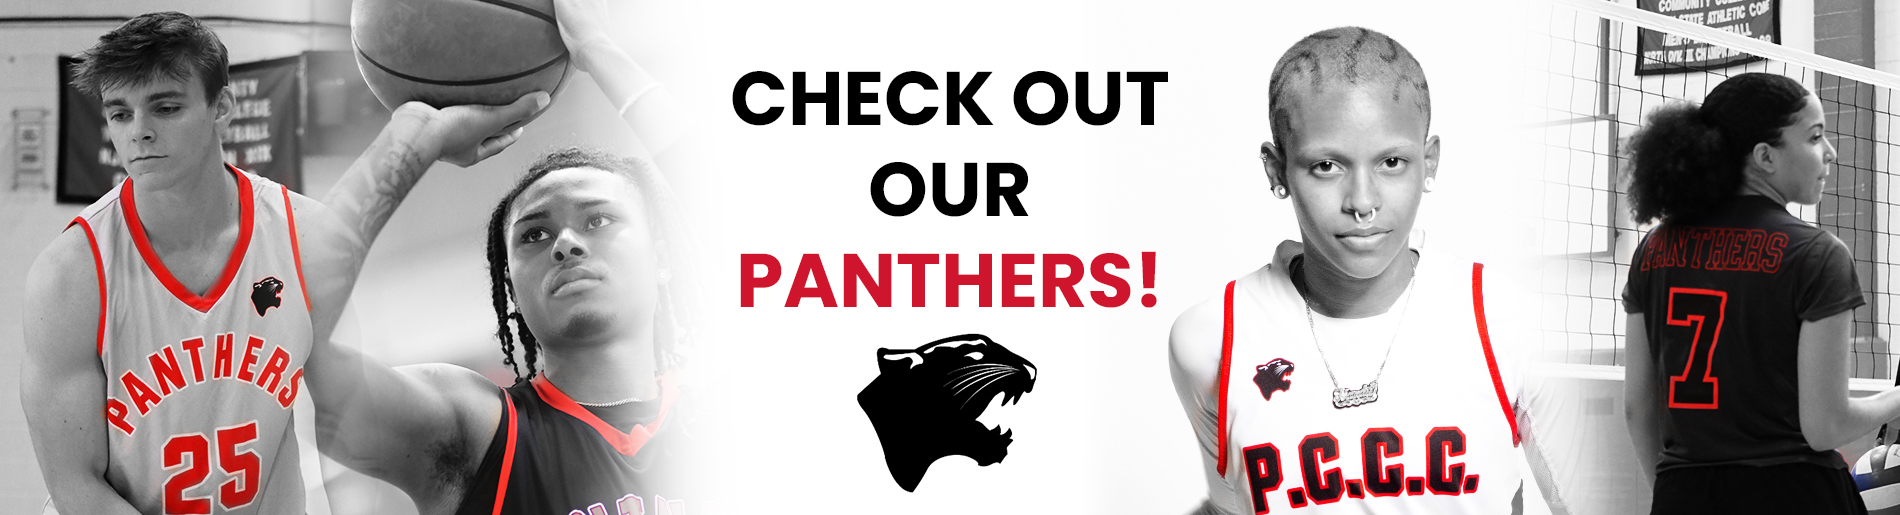 Check out our Panthers